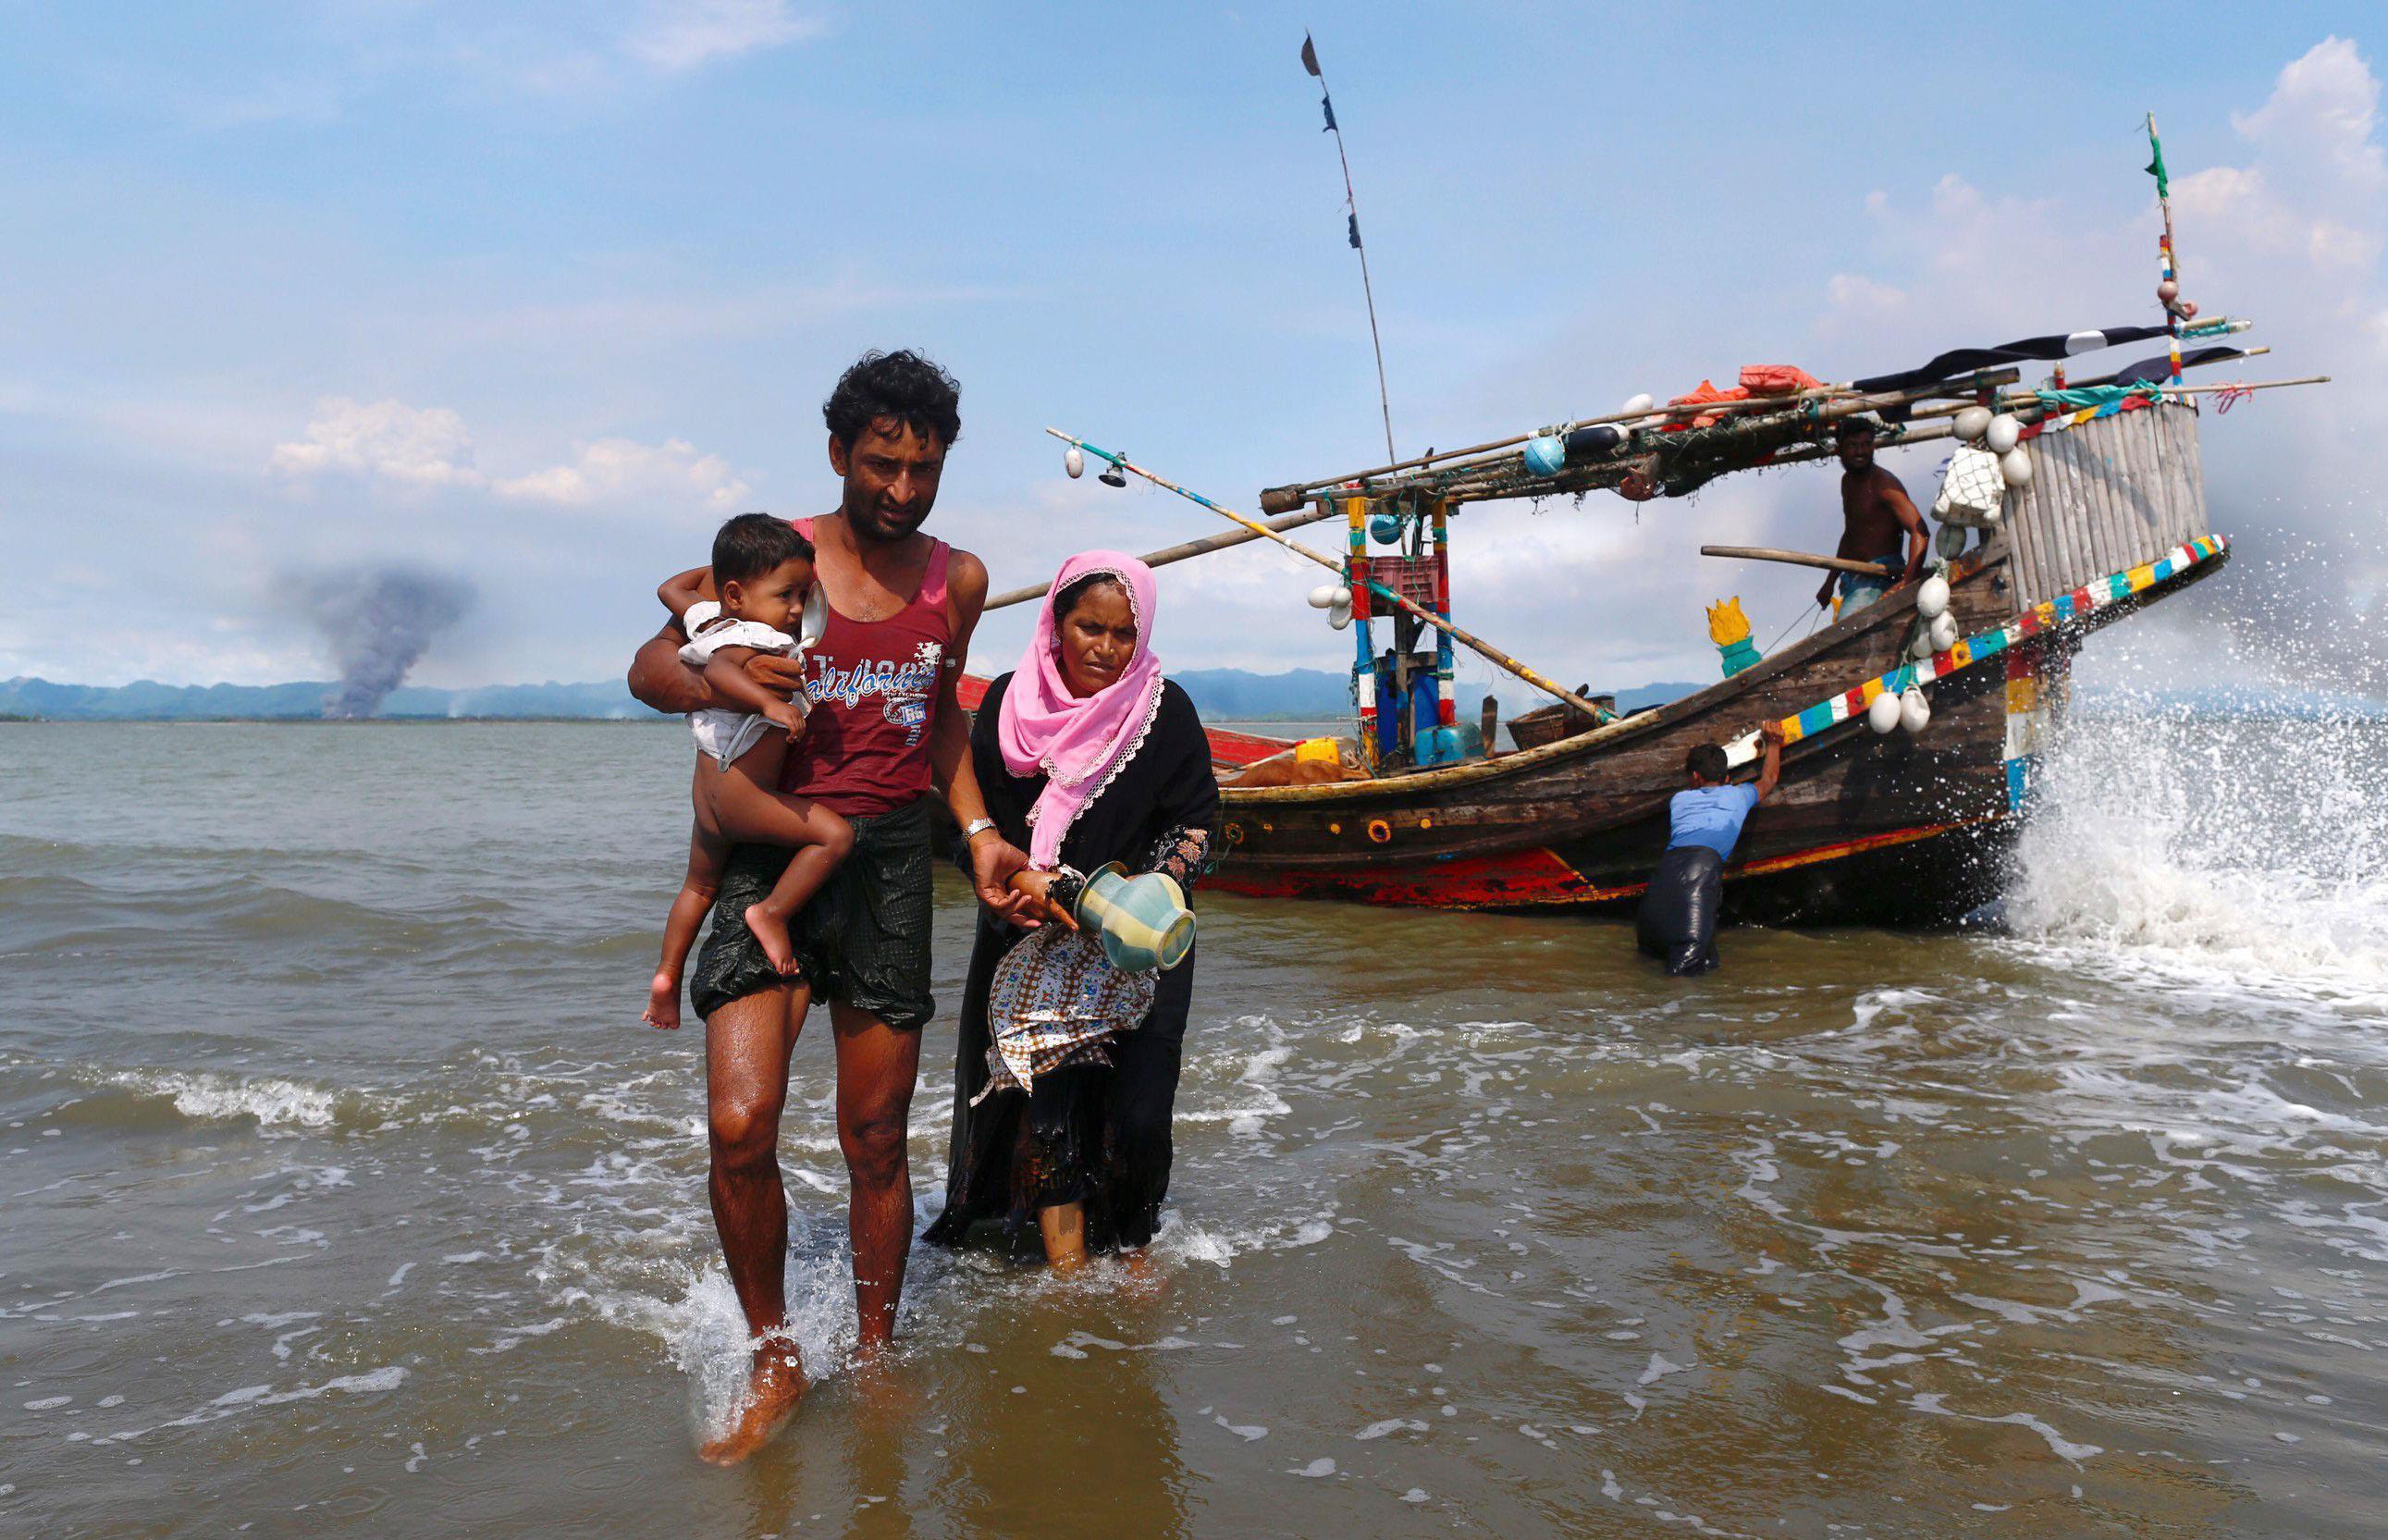 Smoke is seen on Myanmar's side of border as Rohingya refugees get off from a boat after crossing th